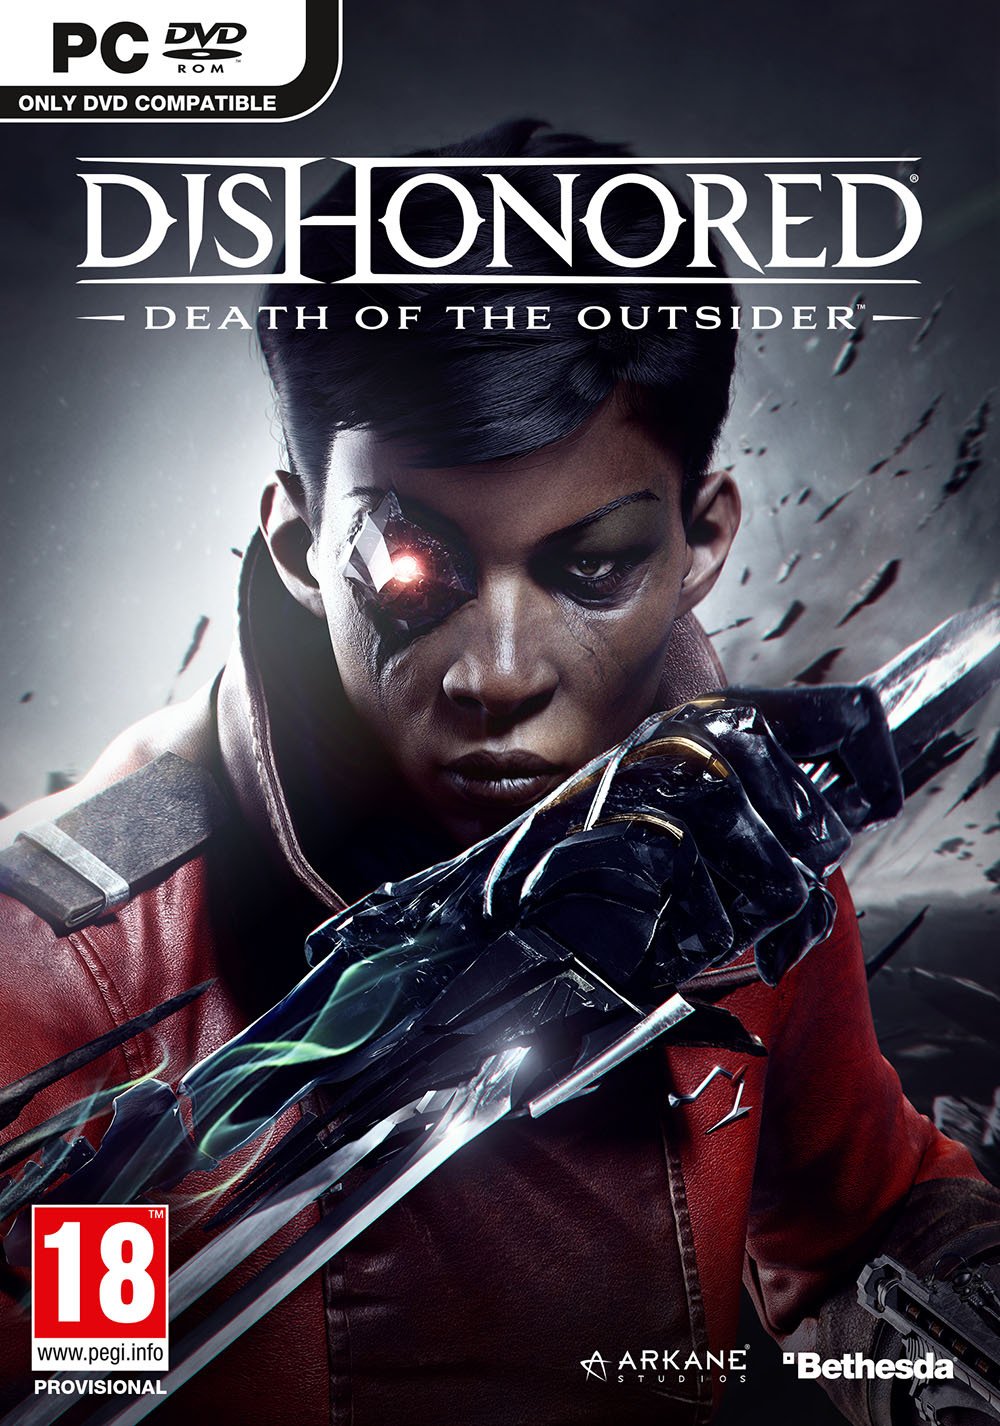 Dishonored Death of The Outsider PC Pre-Order Game.